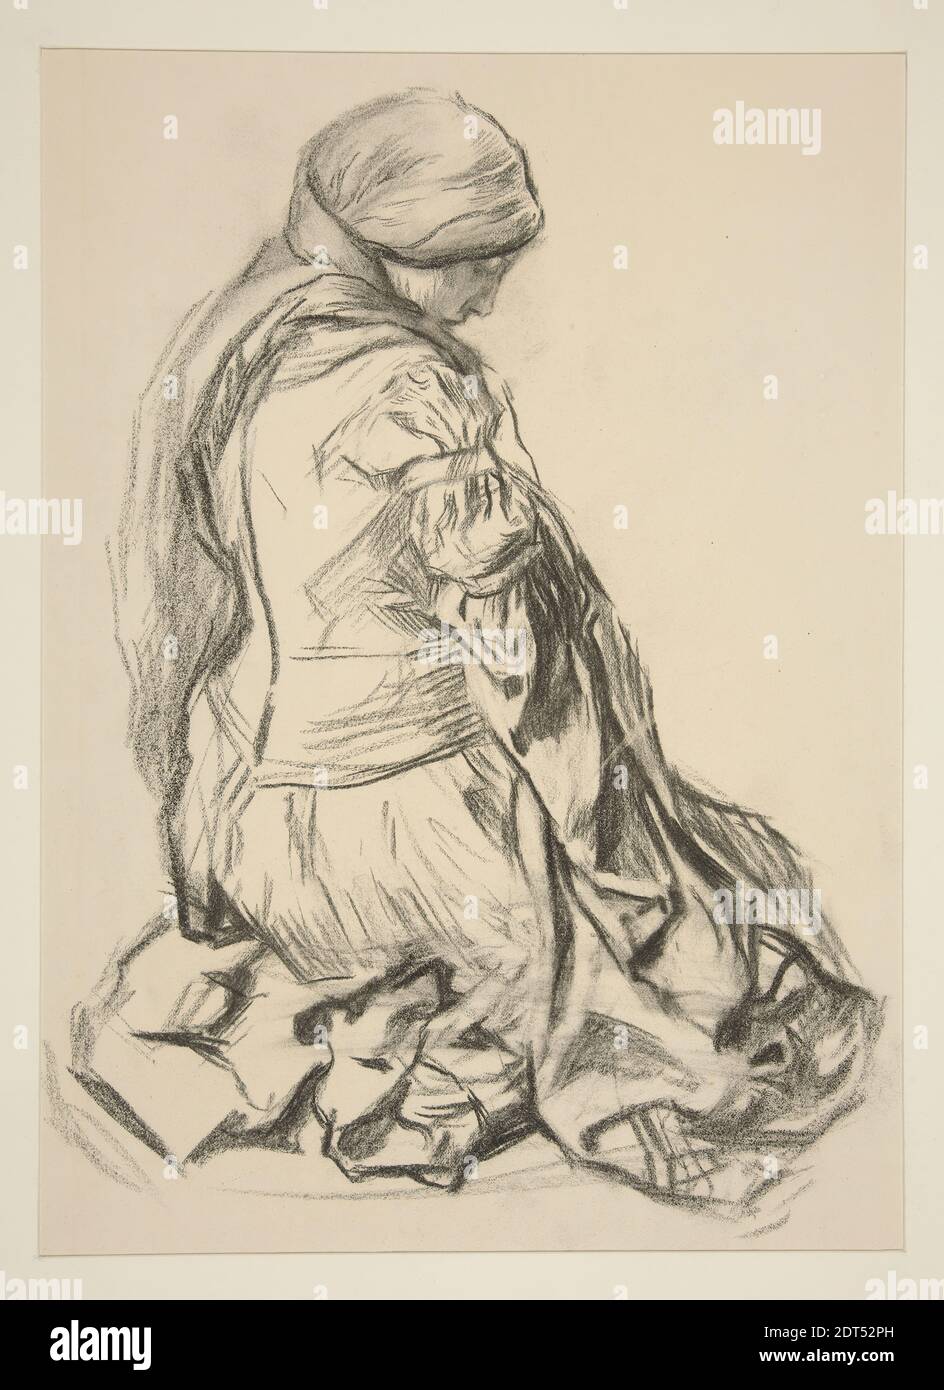 Artist: Edwin Austin Abbey, American, 1852–1911, M.A., 1897, Drapery study for Galahad Departs in The Quest of the Holy Grail mural series at Boston Public Library, Black chalk, 49.4 × 31.1 cm (19 7/16 × 12 1/4 in.), Made in United States, American, 19th century, Works on Paper - Drawings and Watercolors Stock Photo